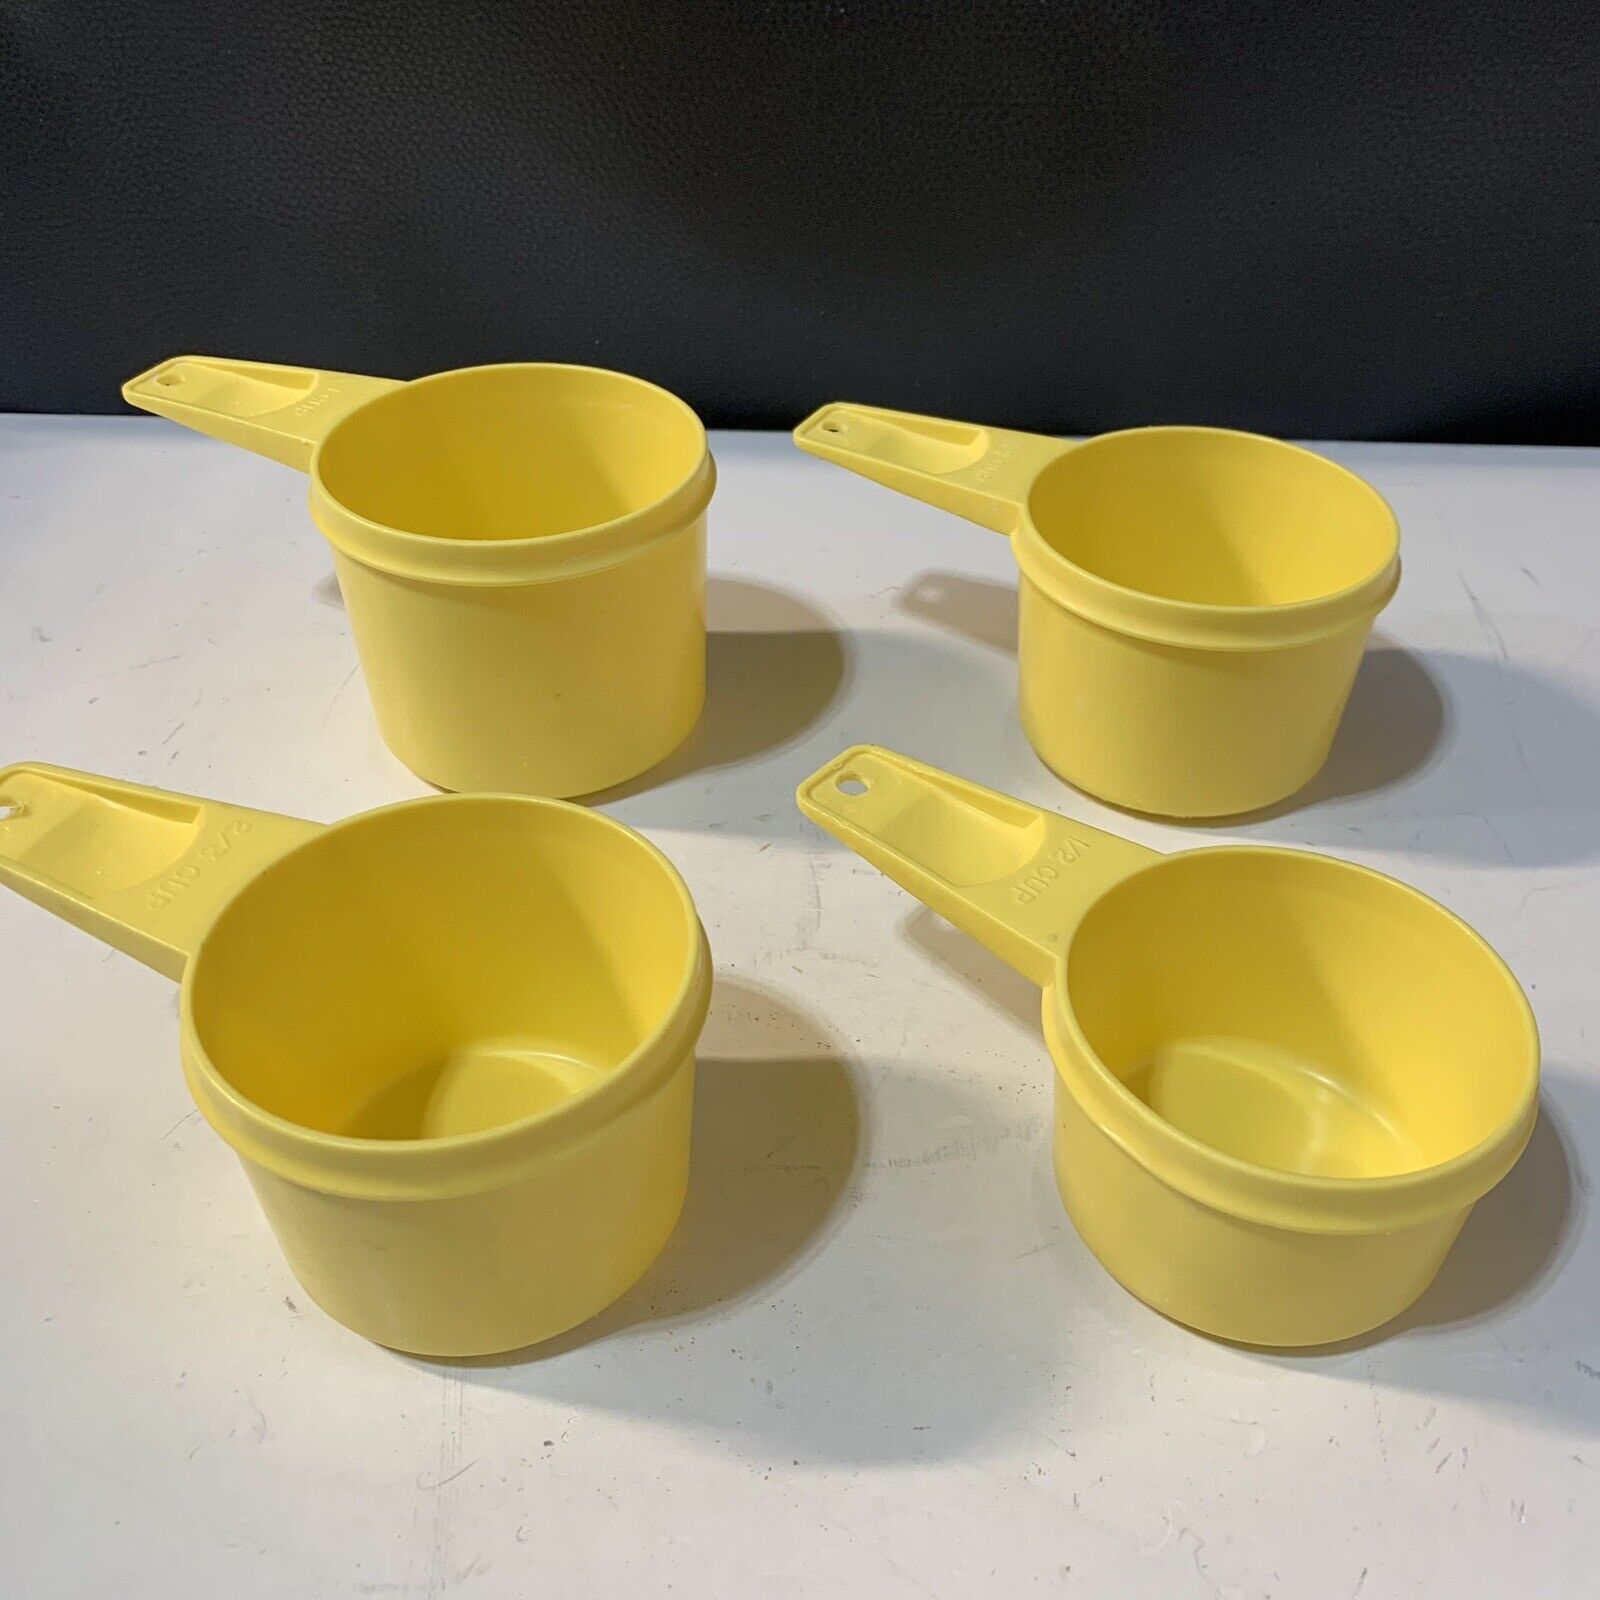 VTG Tupperware 1 C, 3/4 C, 2/3 C 1/2 Cup Yellow Measuring Cup Set Of 4, 4761-7